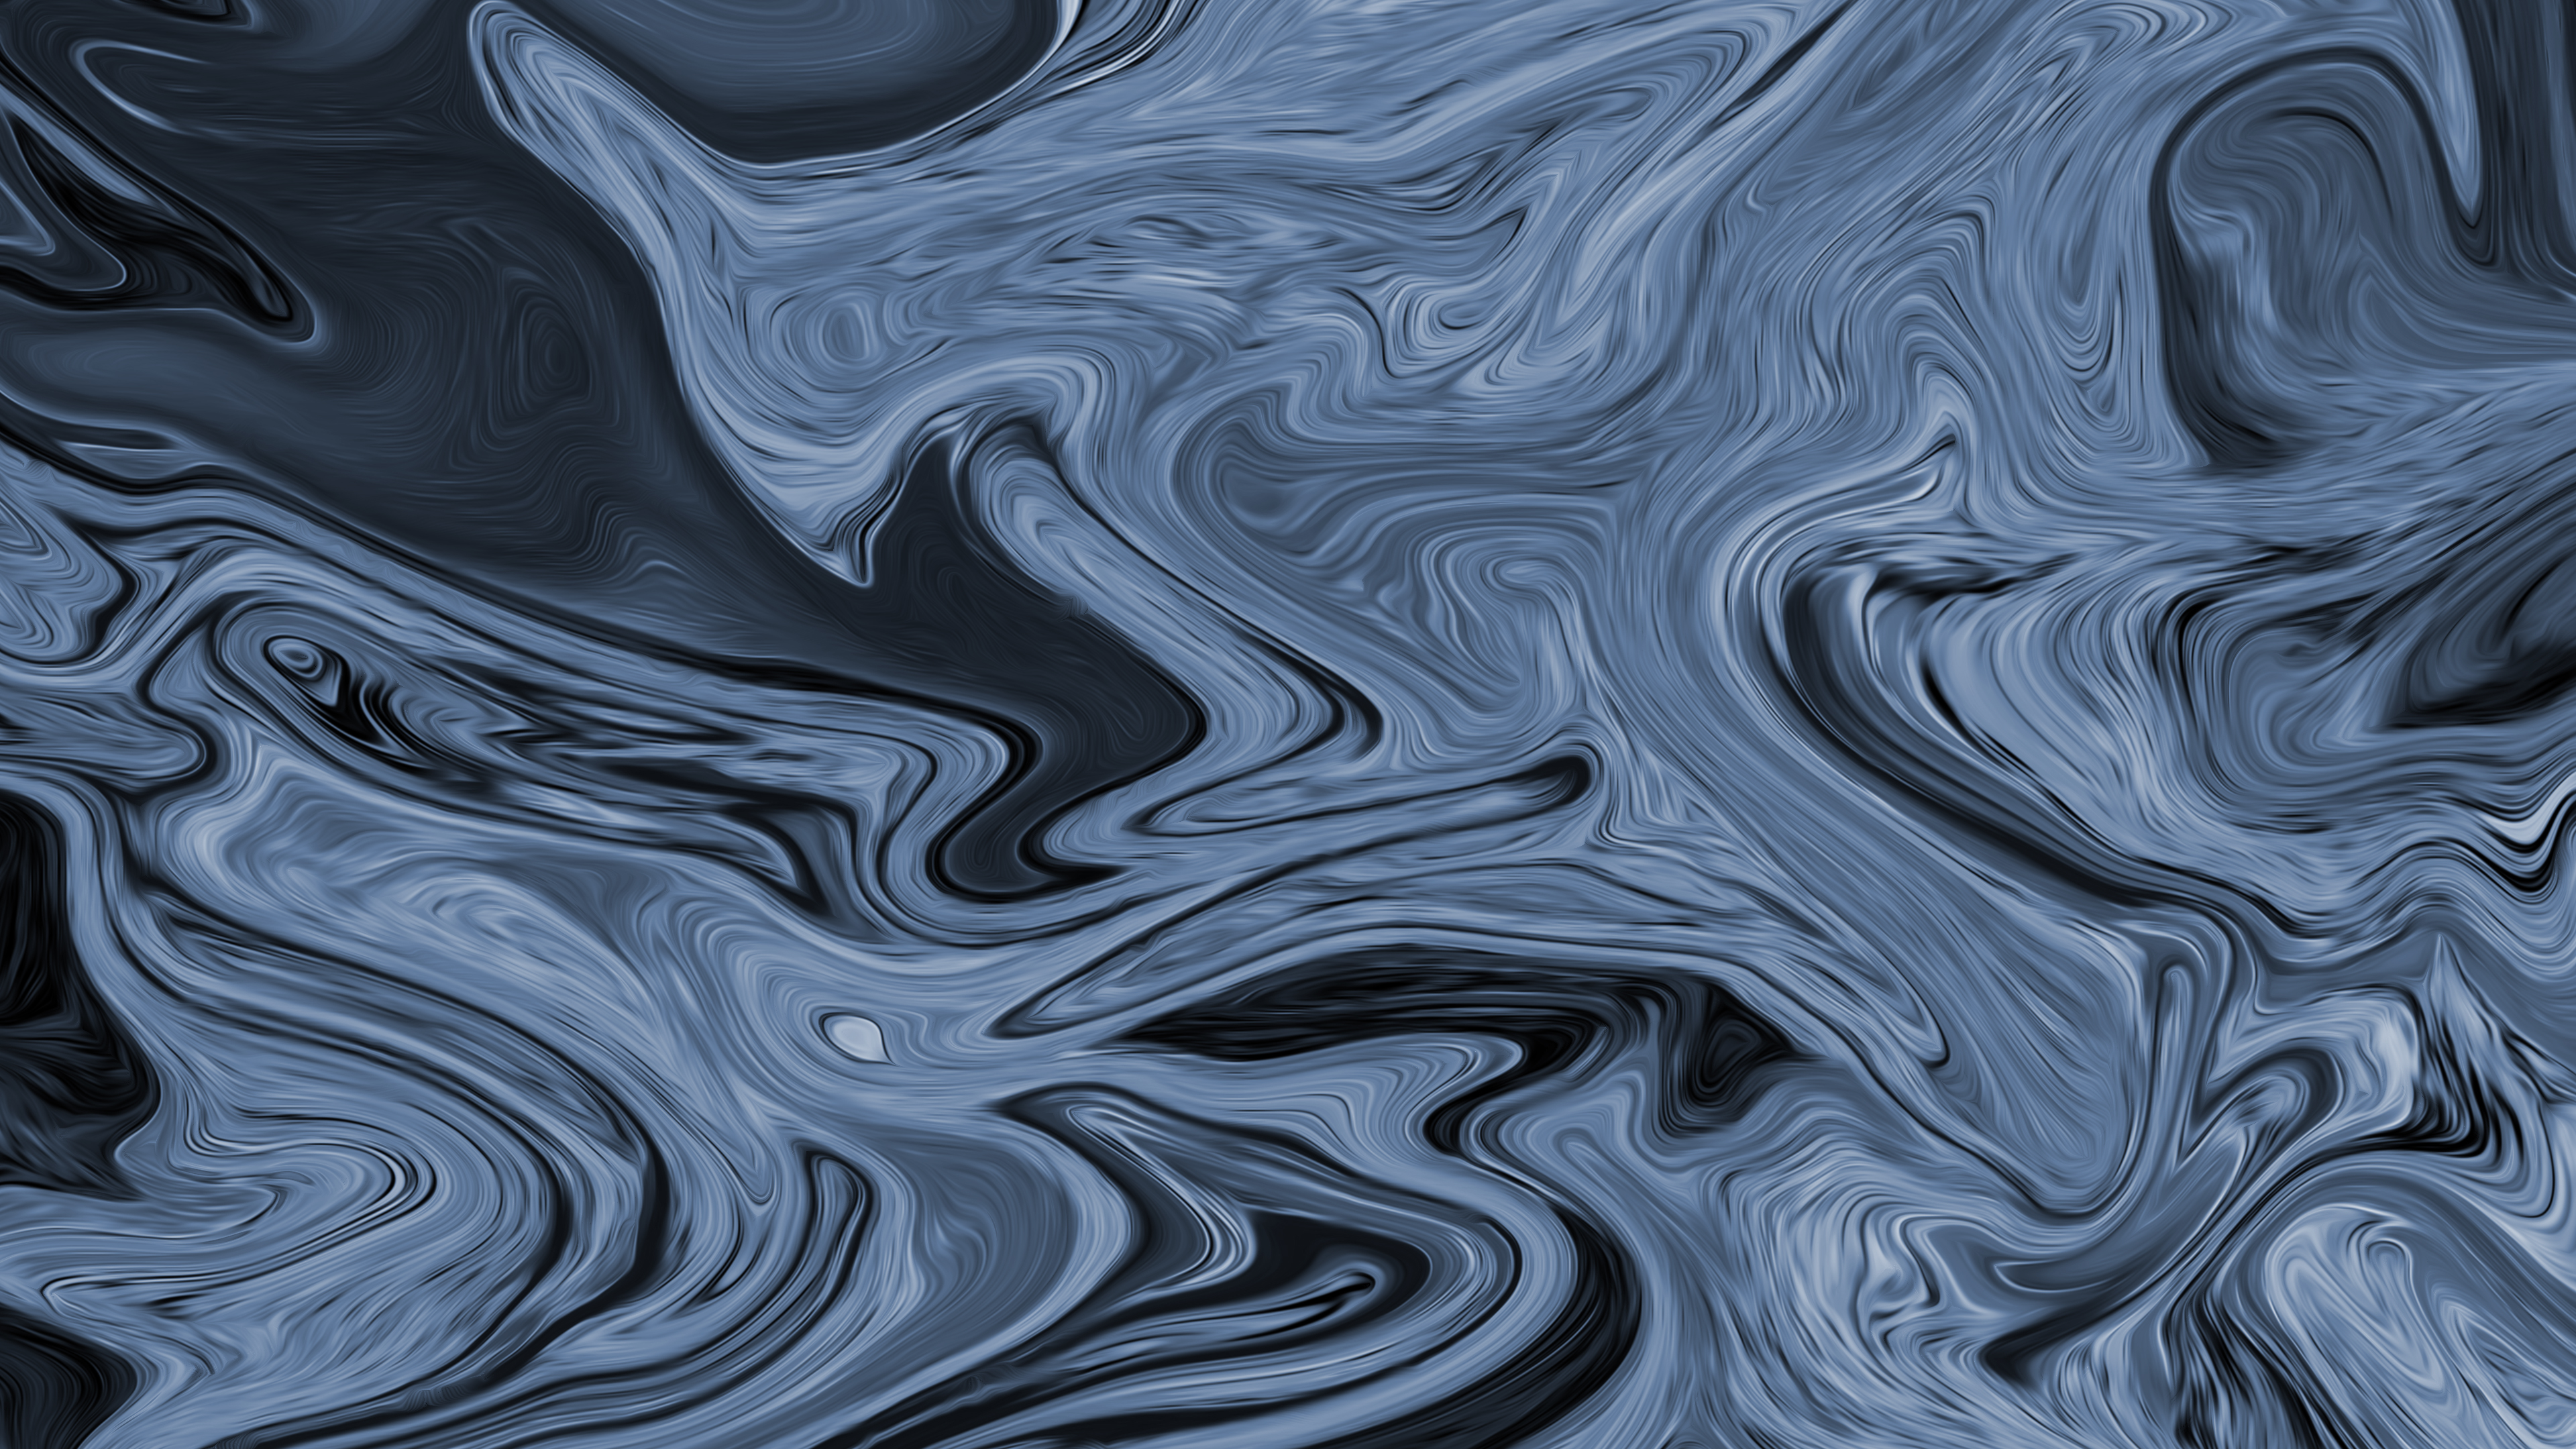 Abstract Fluid Liquid Artwork Colorful Shapes Monochrome Blue Gray 3840x2160